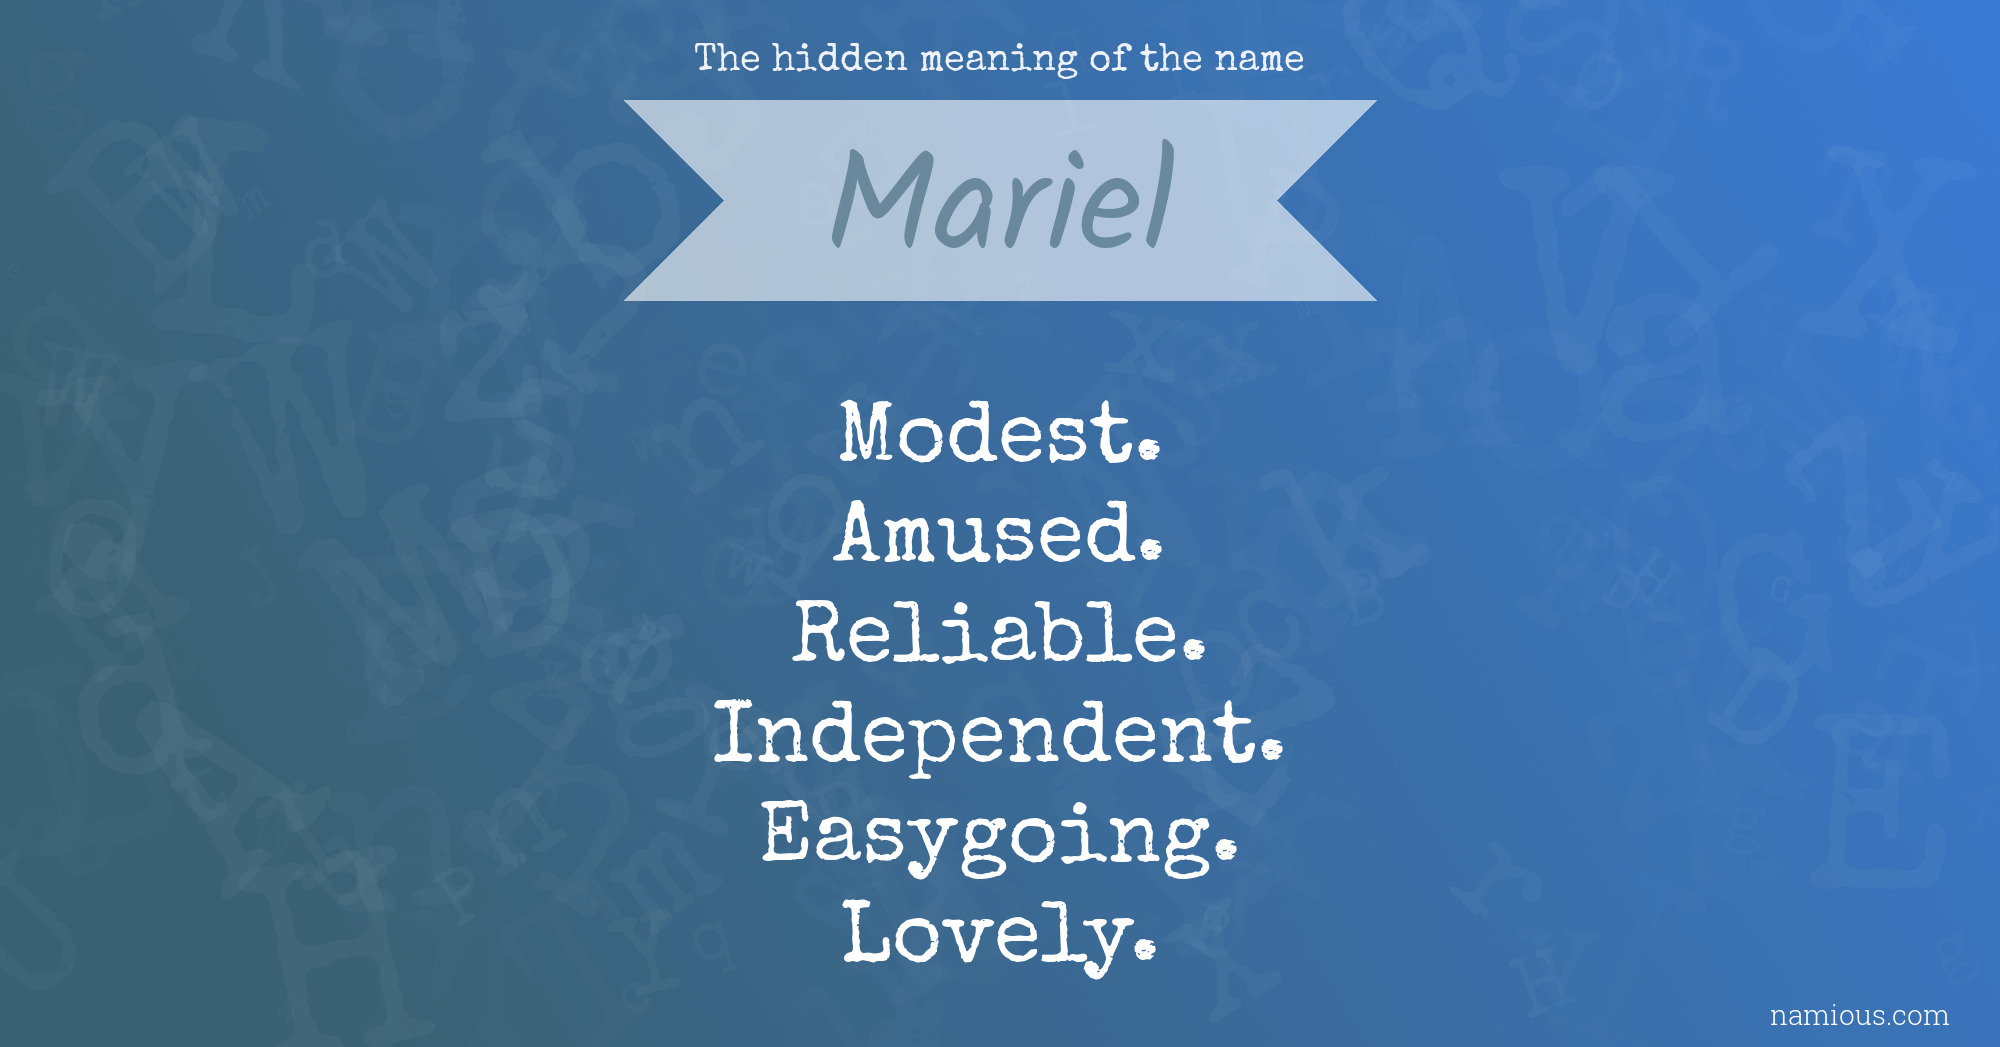 The hidden meaning of the name Mariel